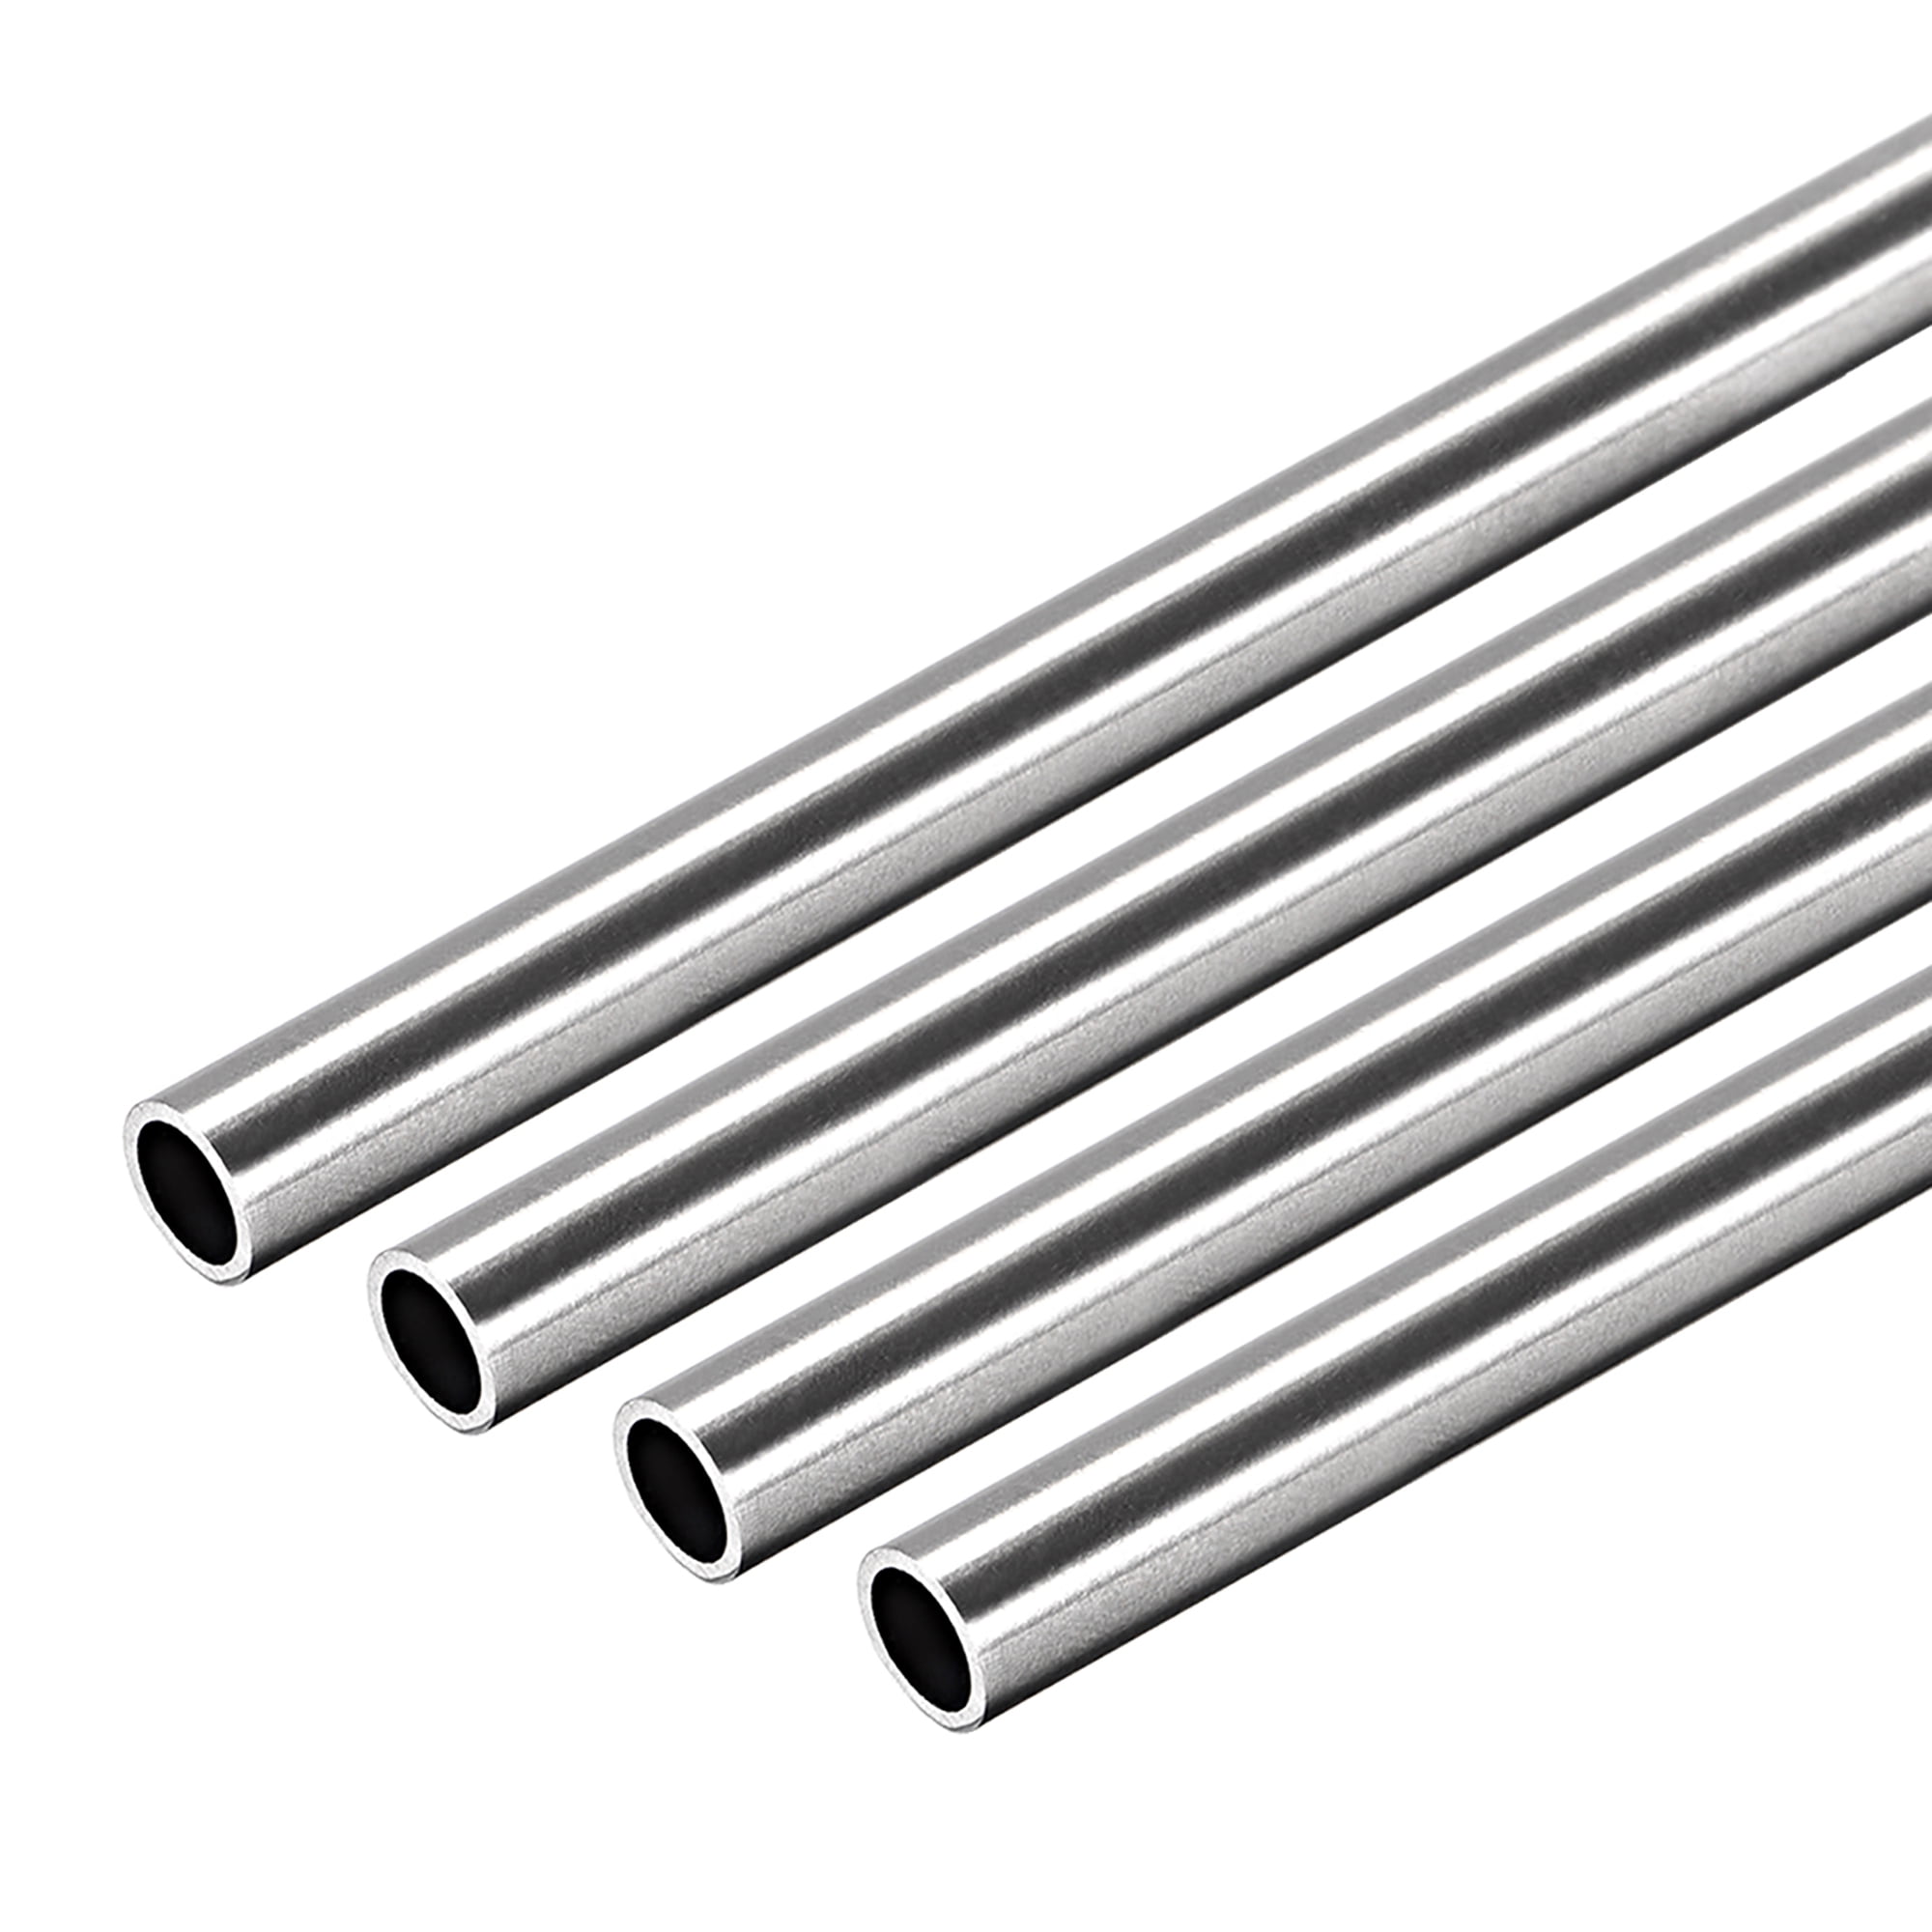 Uxcell 7mm OD 0.8mm Wall Thick 250mm Length 304 Stainless Steel Tube 4 Telescoping Thin Wall Steel Tubing With Buttom Clips